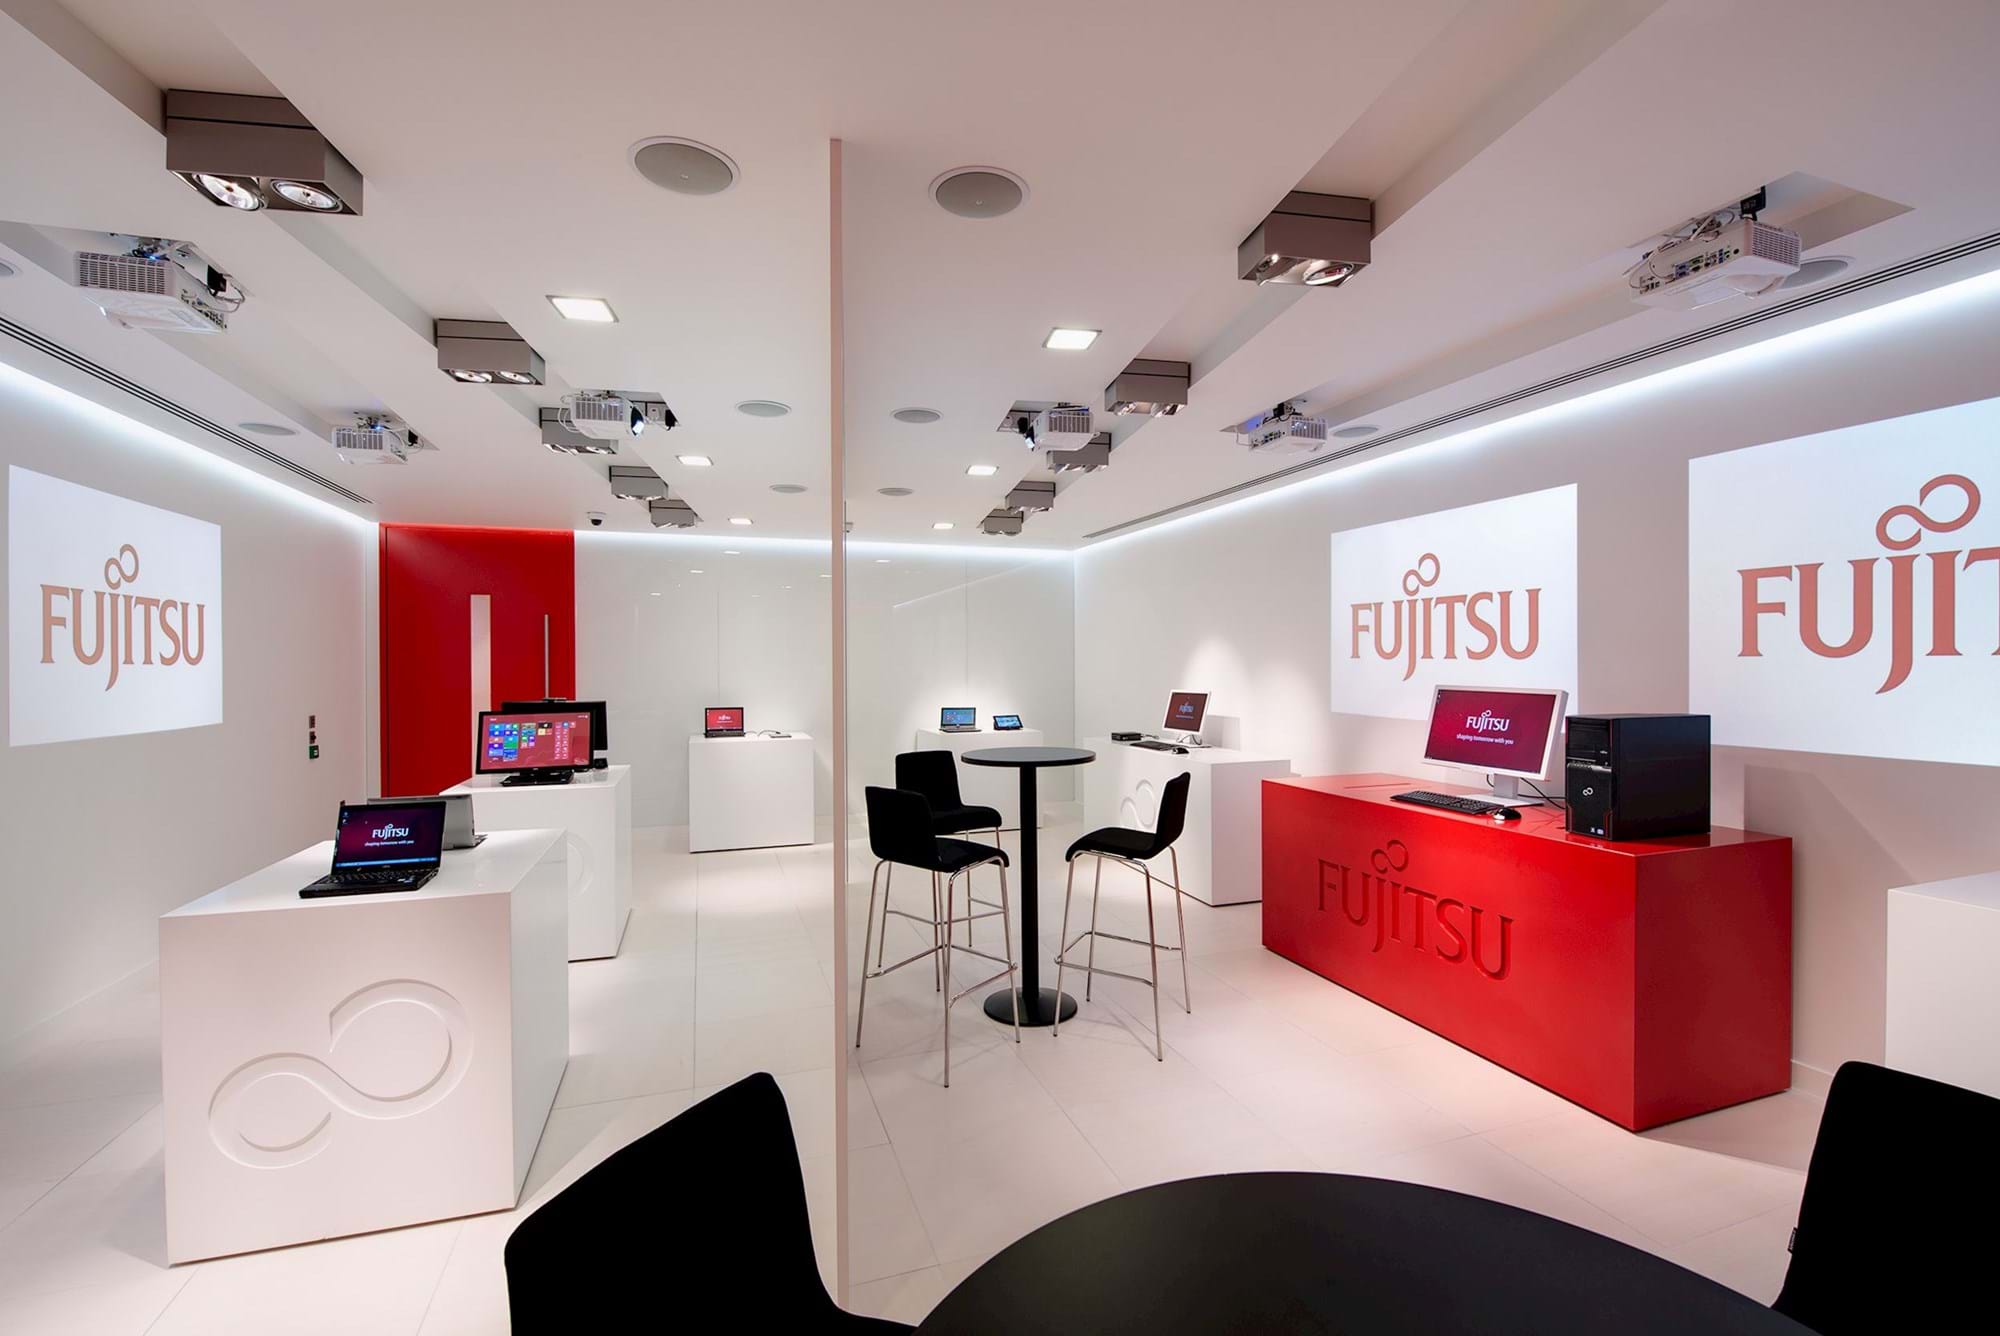 Modus Workspace office design, fit out and refurbishment - LON 22 Innovation Centre - Special Features - Fujitsu 04 highres sRGB.jpg